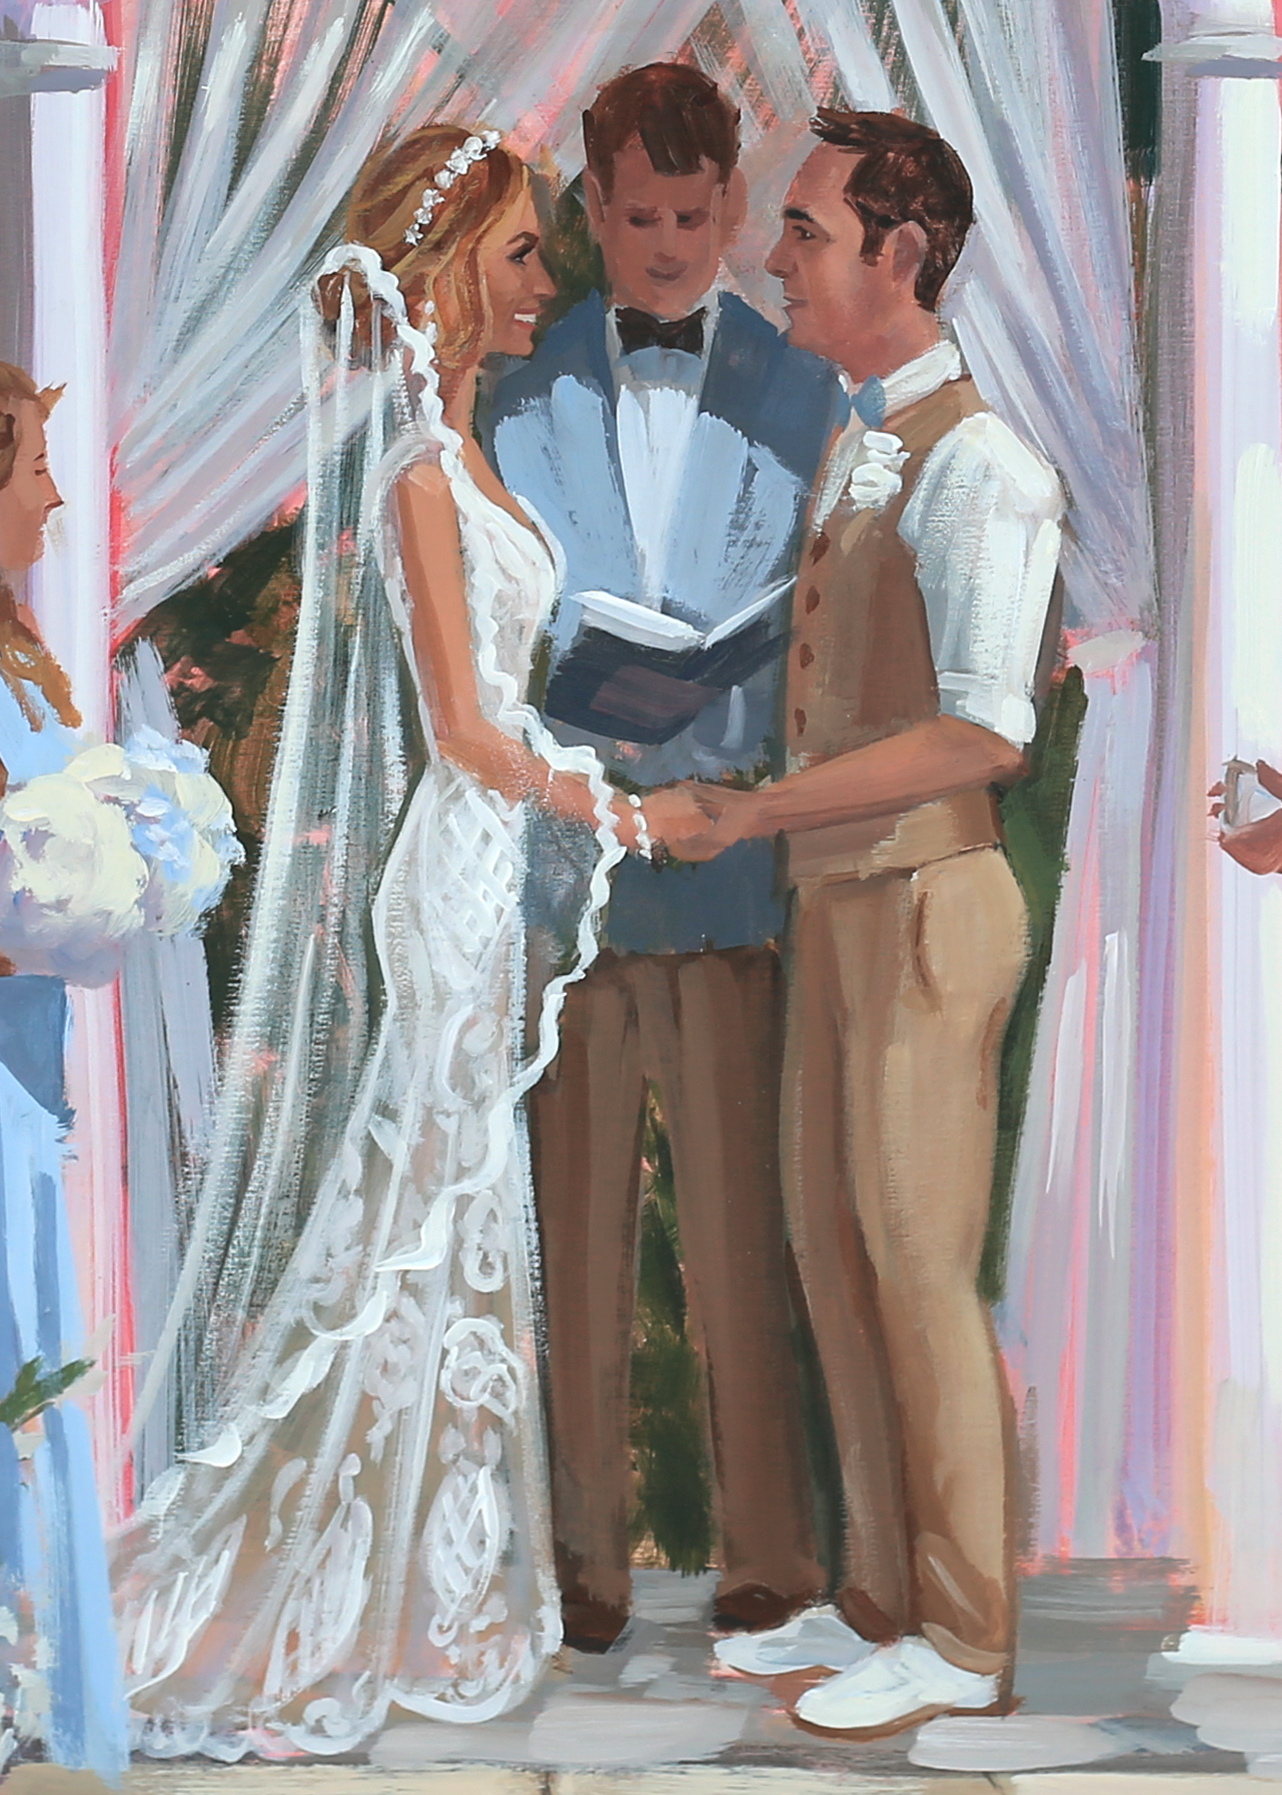 Close Up of the details from Megan + Joey’s live wedding painting created at their ceremony at downtown Charleston’s William Aiken House.